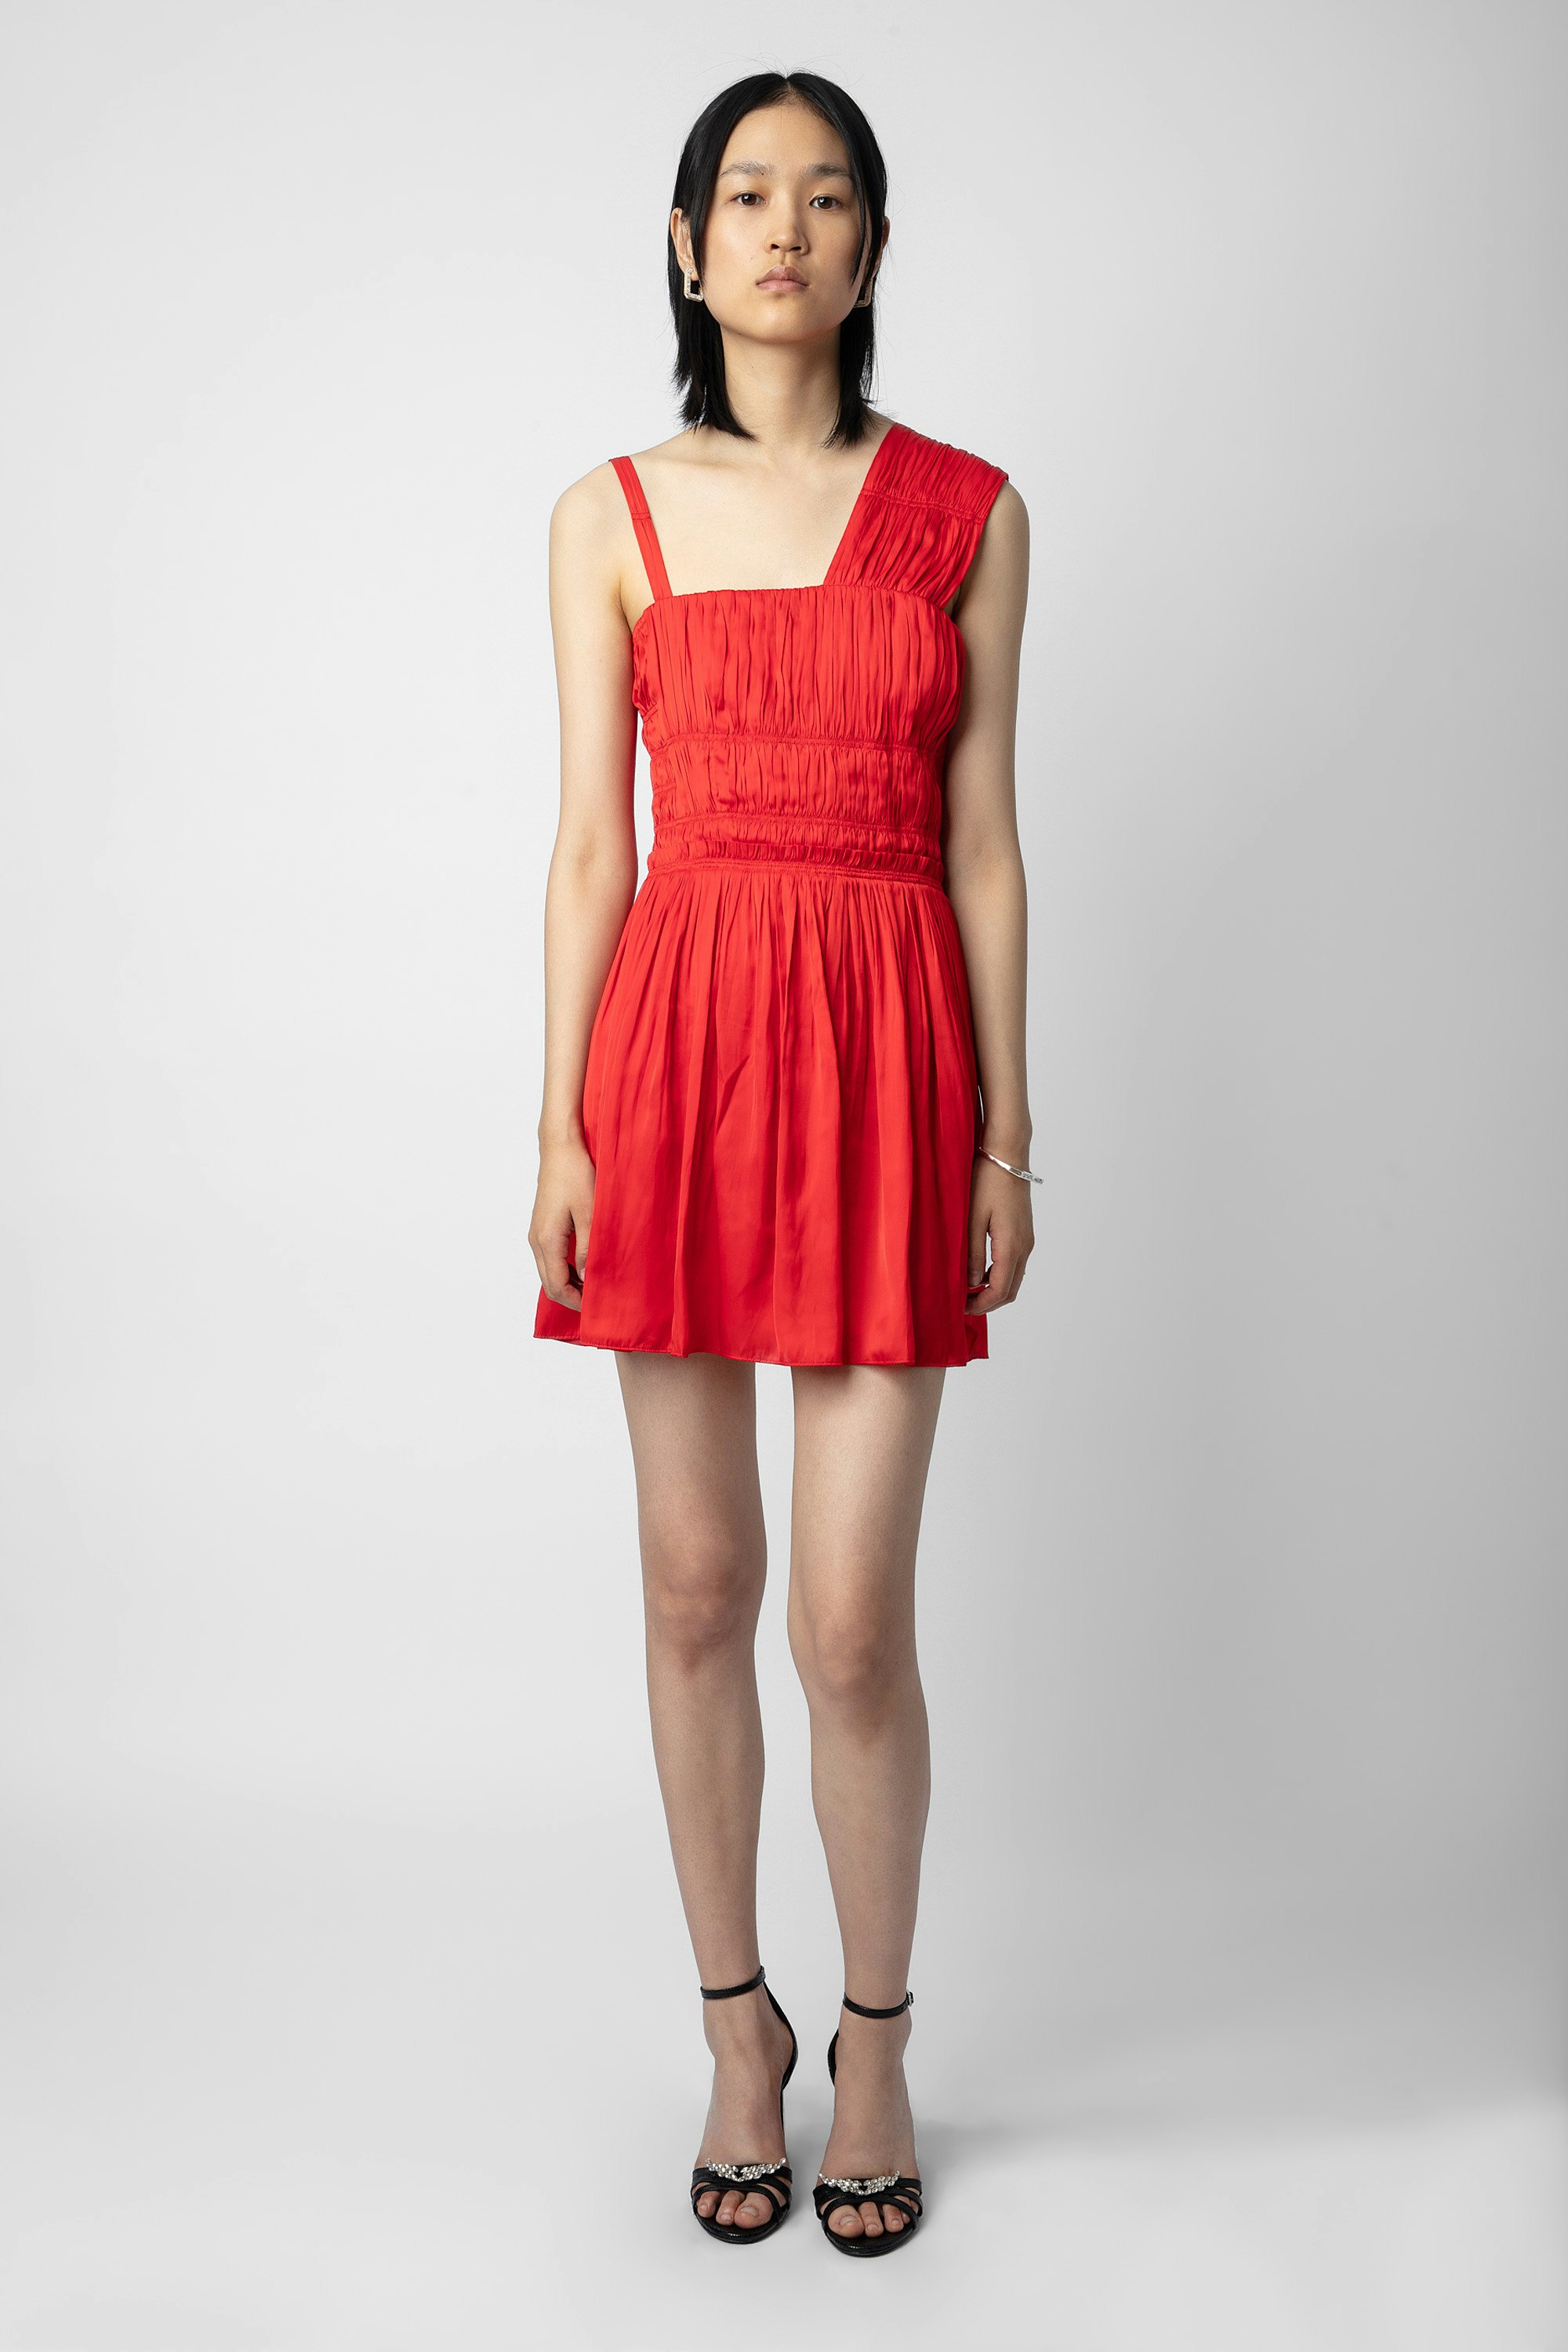 Roselie Satin Dress - Women’s short red satin one-shoulder dress with gathers.